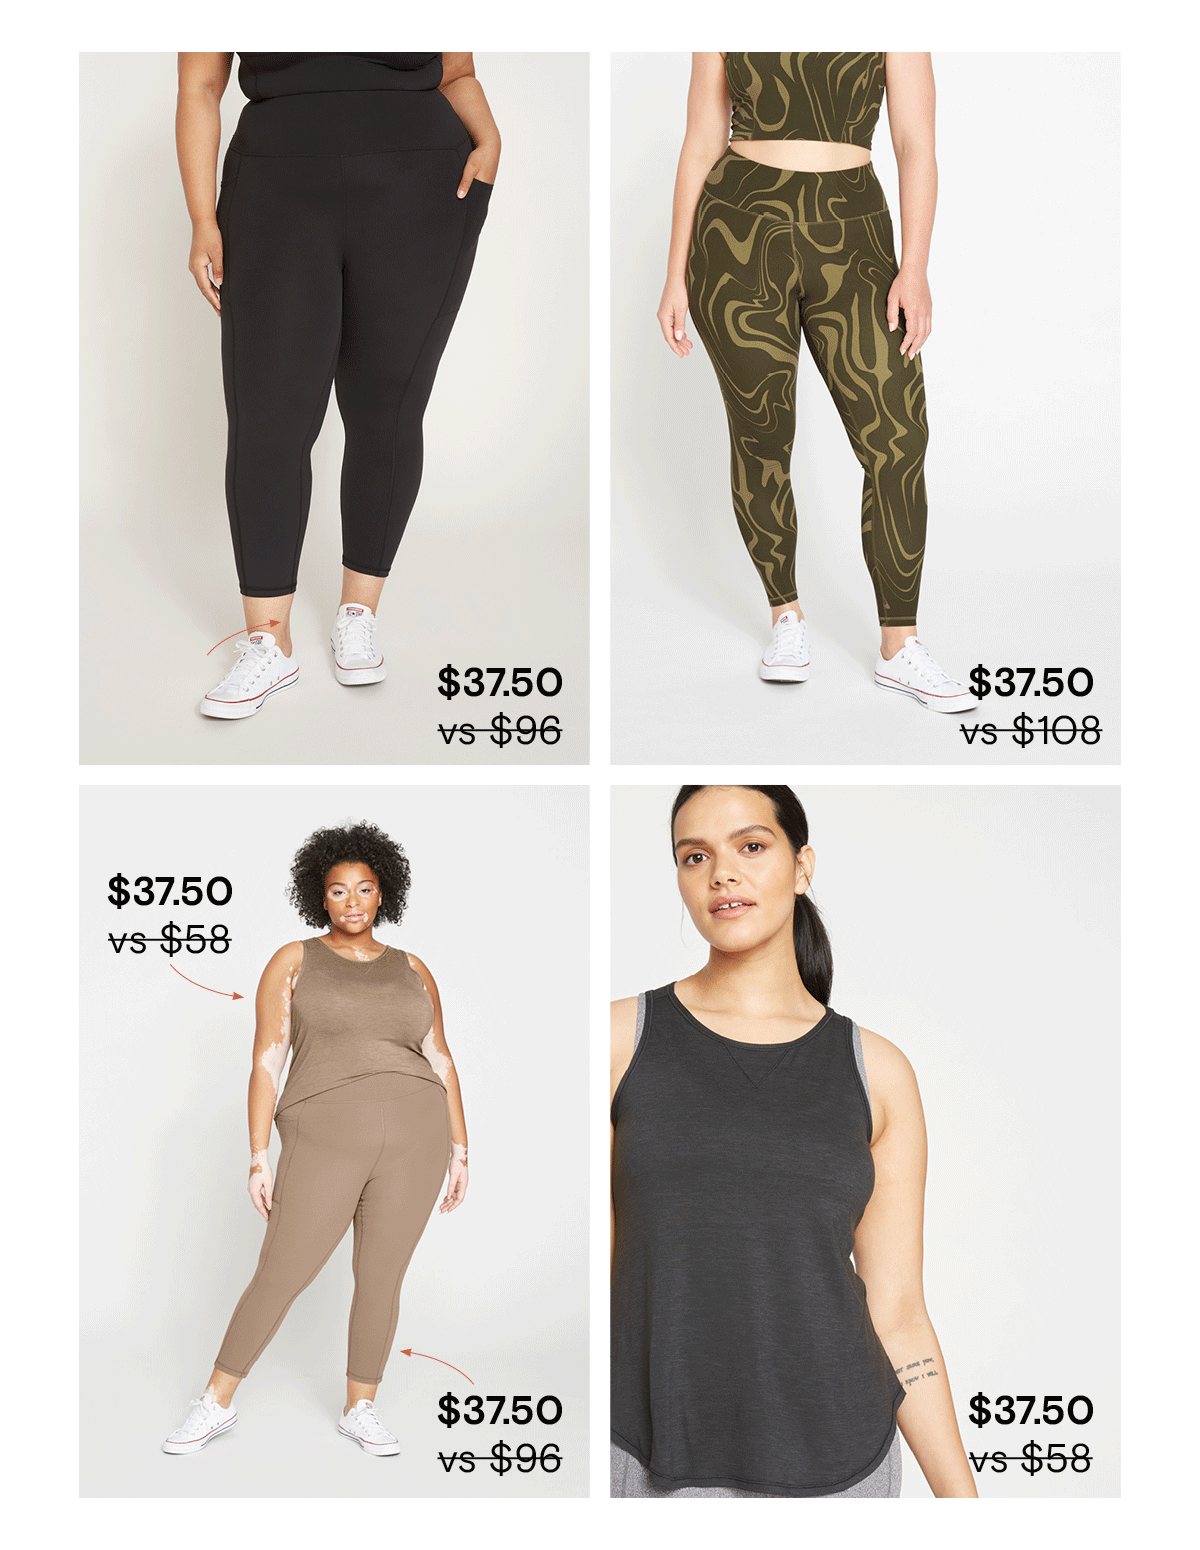 Shop these perfectly paired athletic styles for $37.50